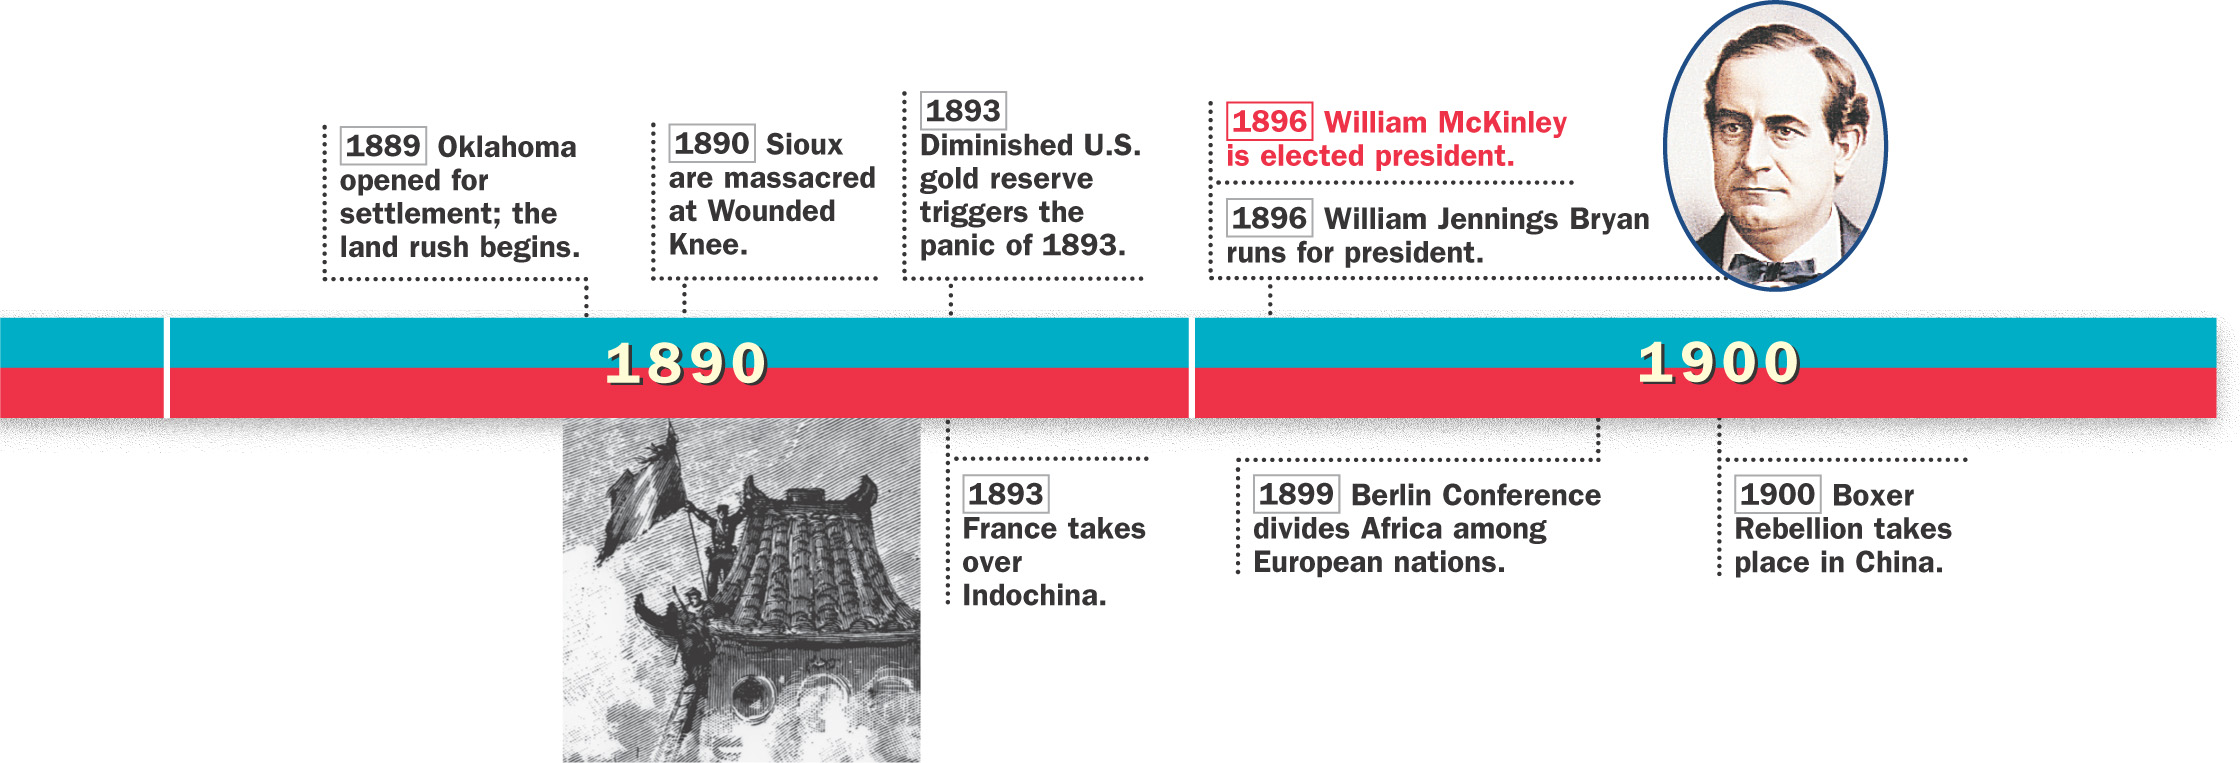 A timeline of historical events in both the U.S. and the world from 1869 to 1900.